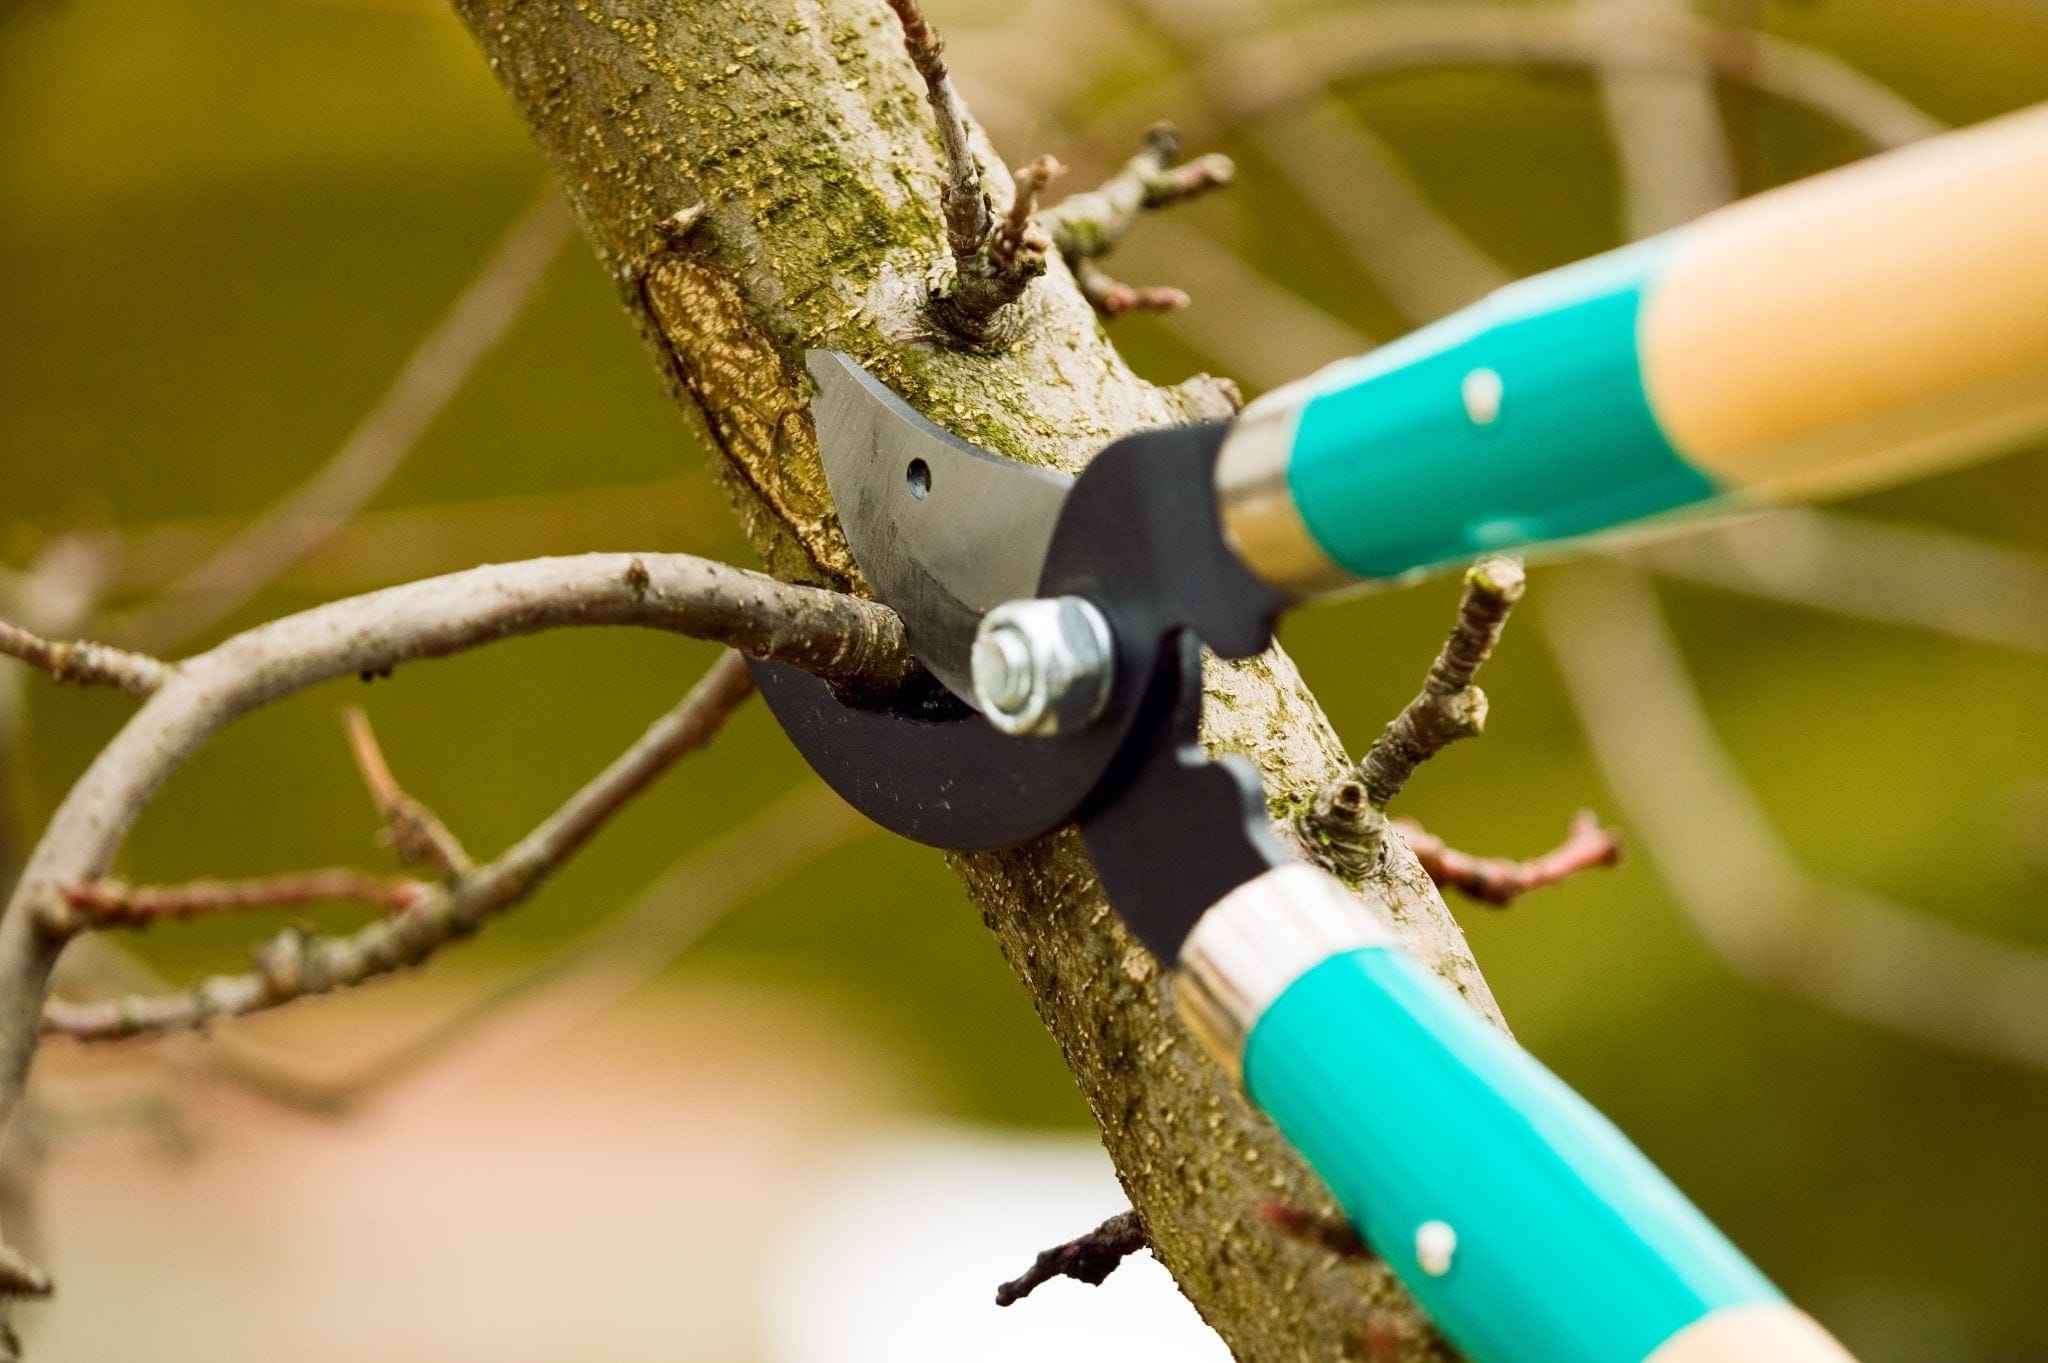 D.E.E.R. Speaker Series- Tree Pruning with Ken Wheat